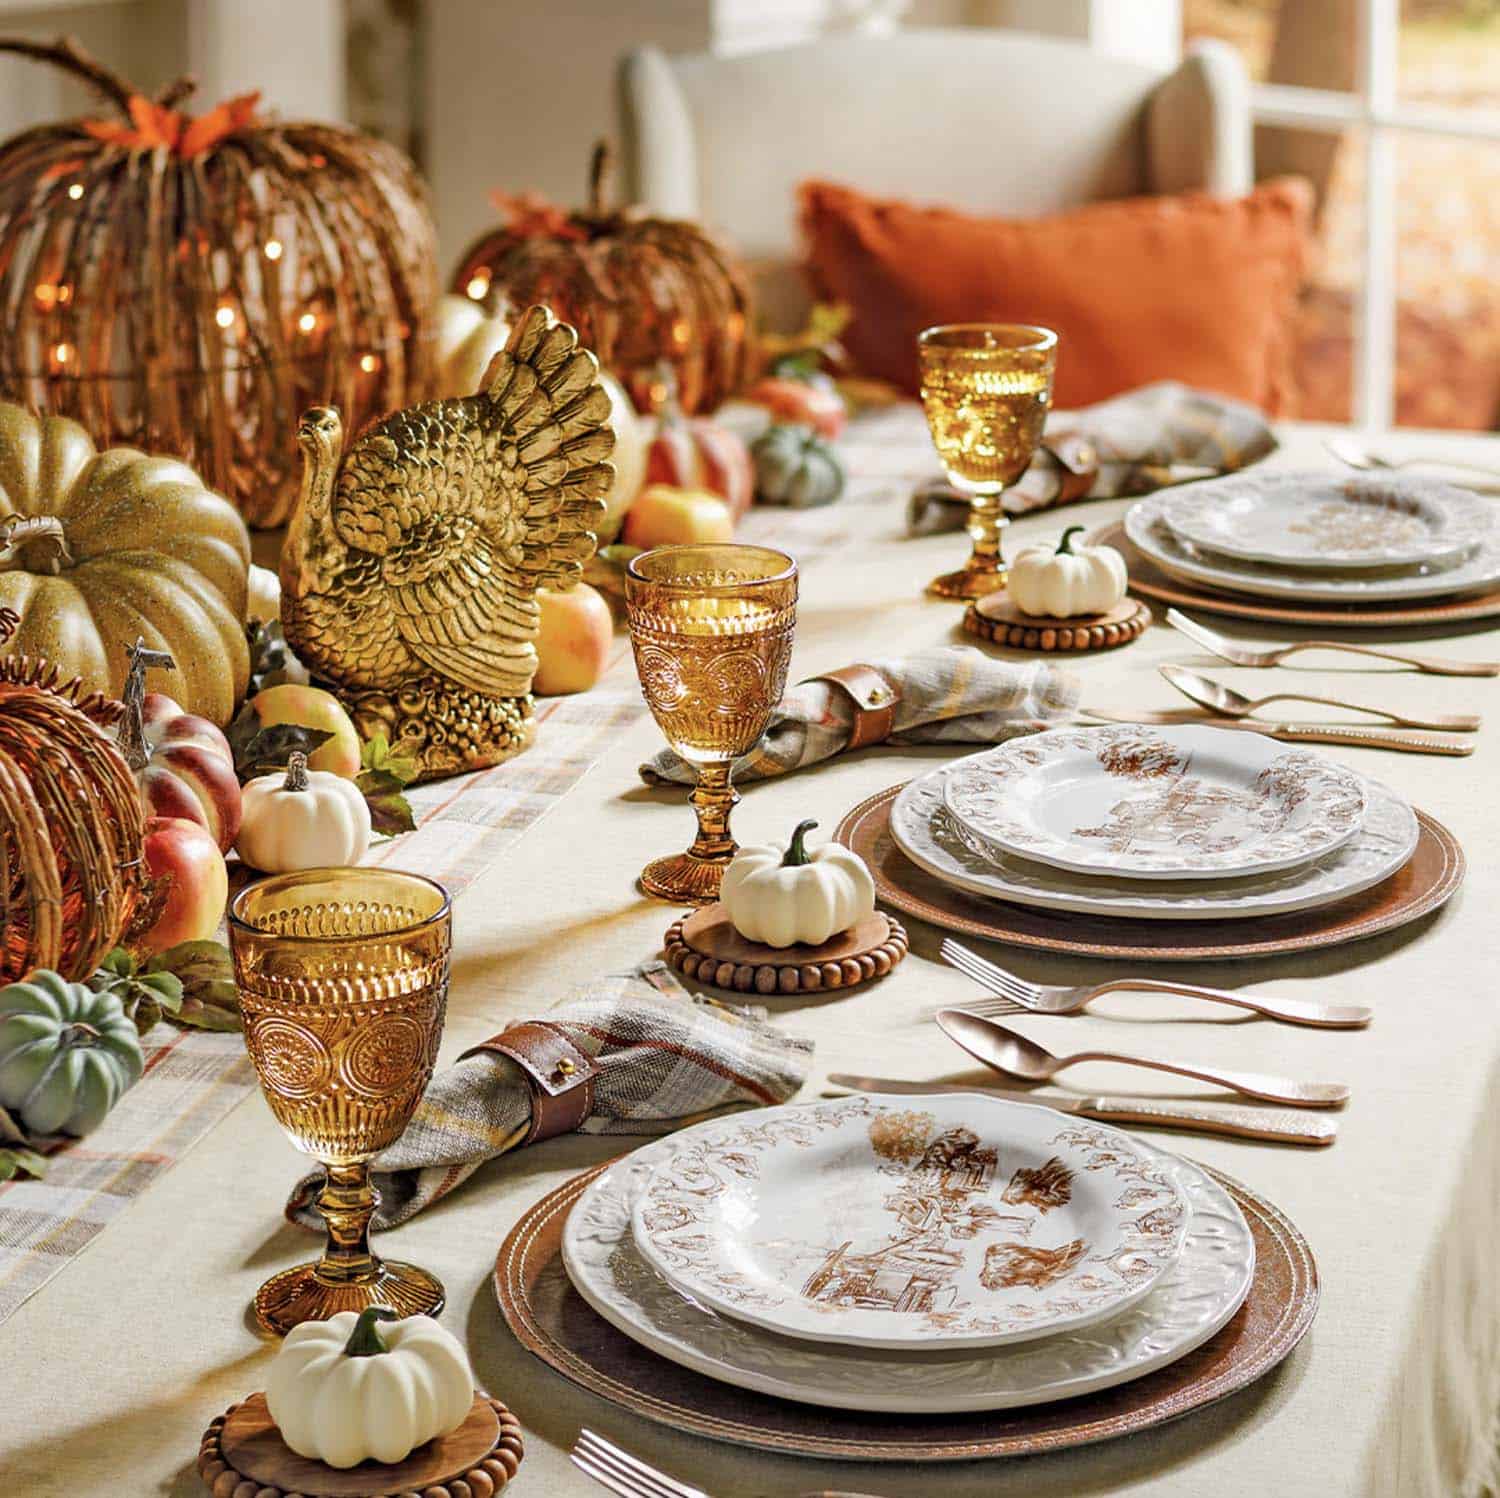 Thanksgiving table setting with gold accents and pumpkins